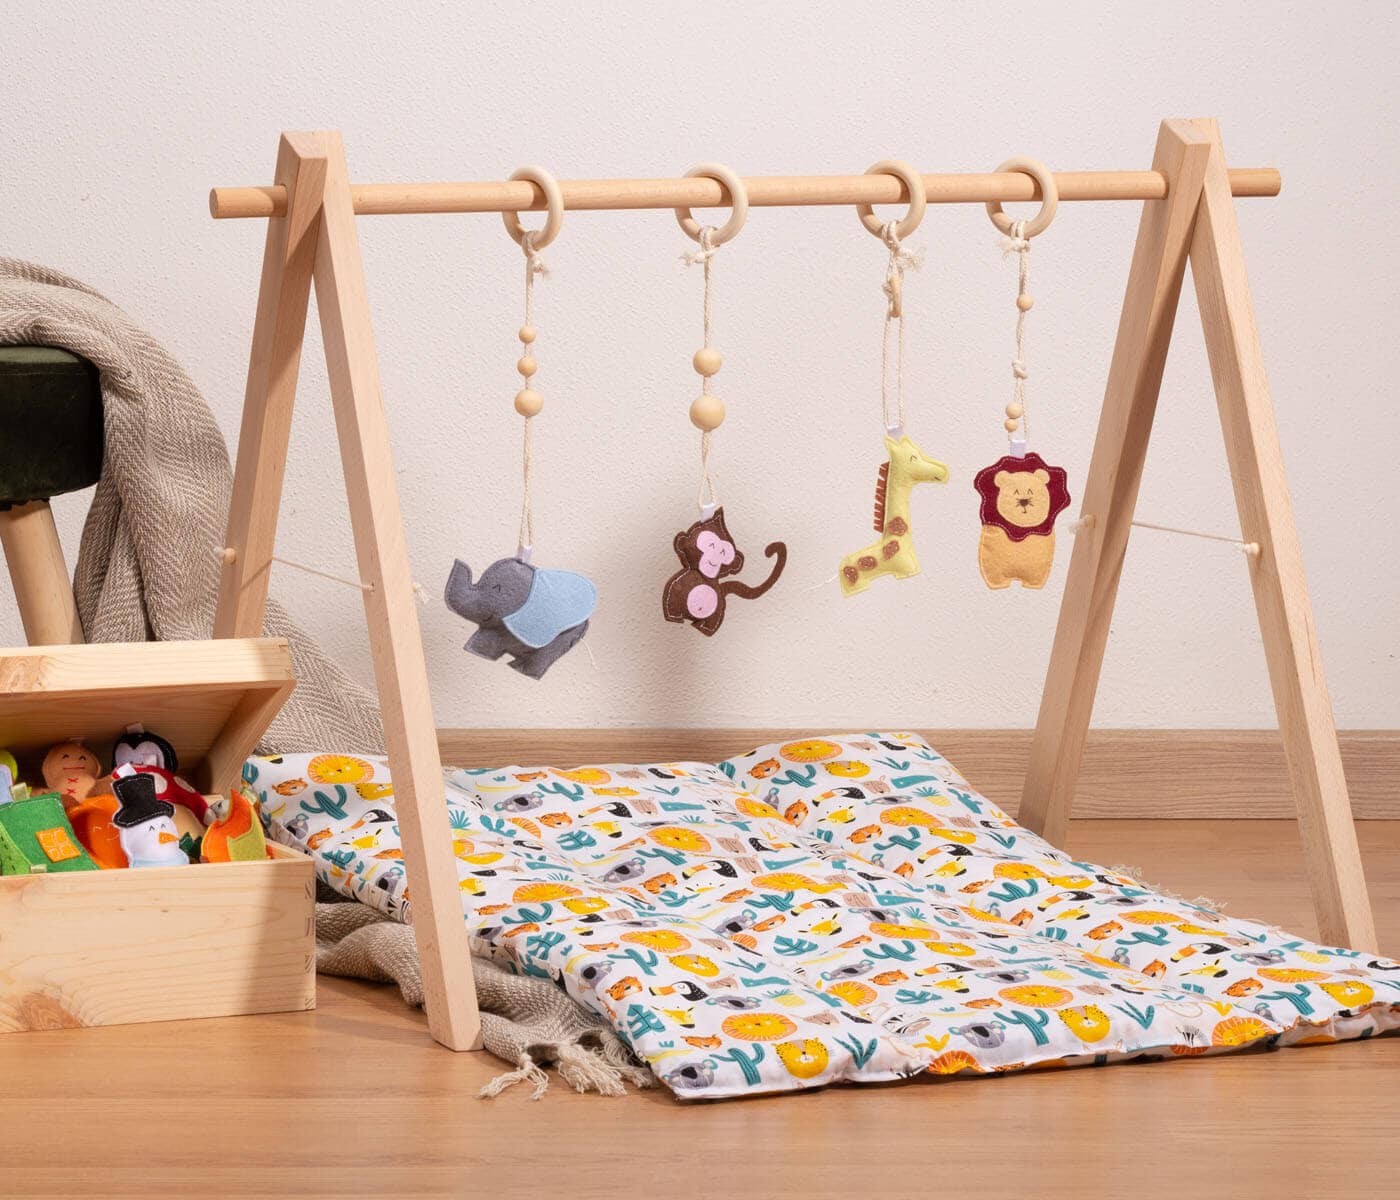 Gift idea for a newborn baby? A wooden Baby Gym!